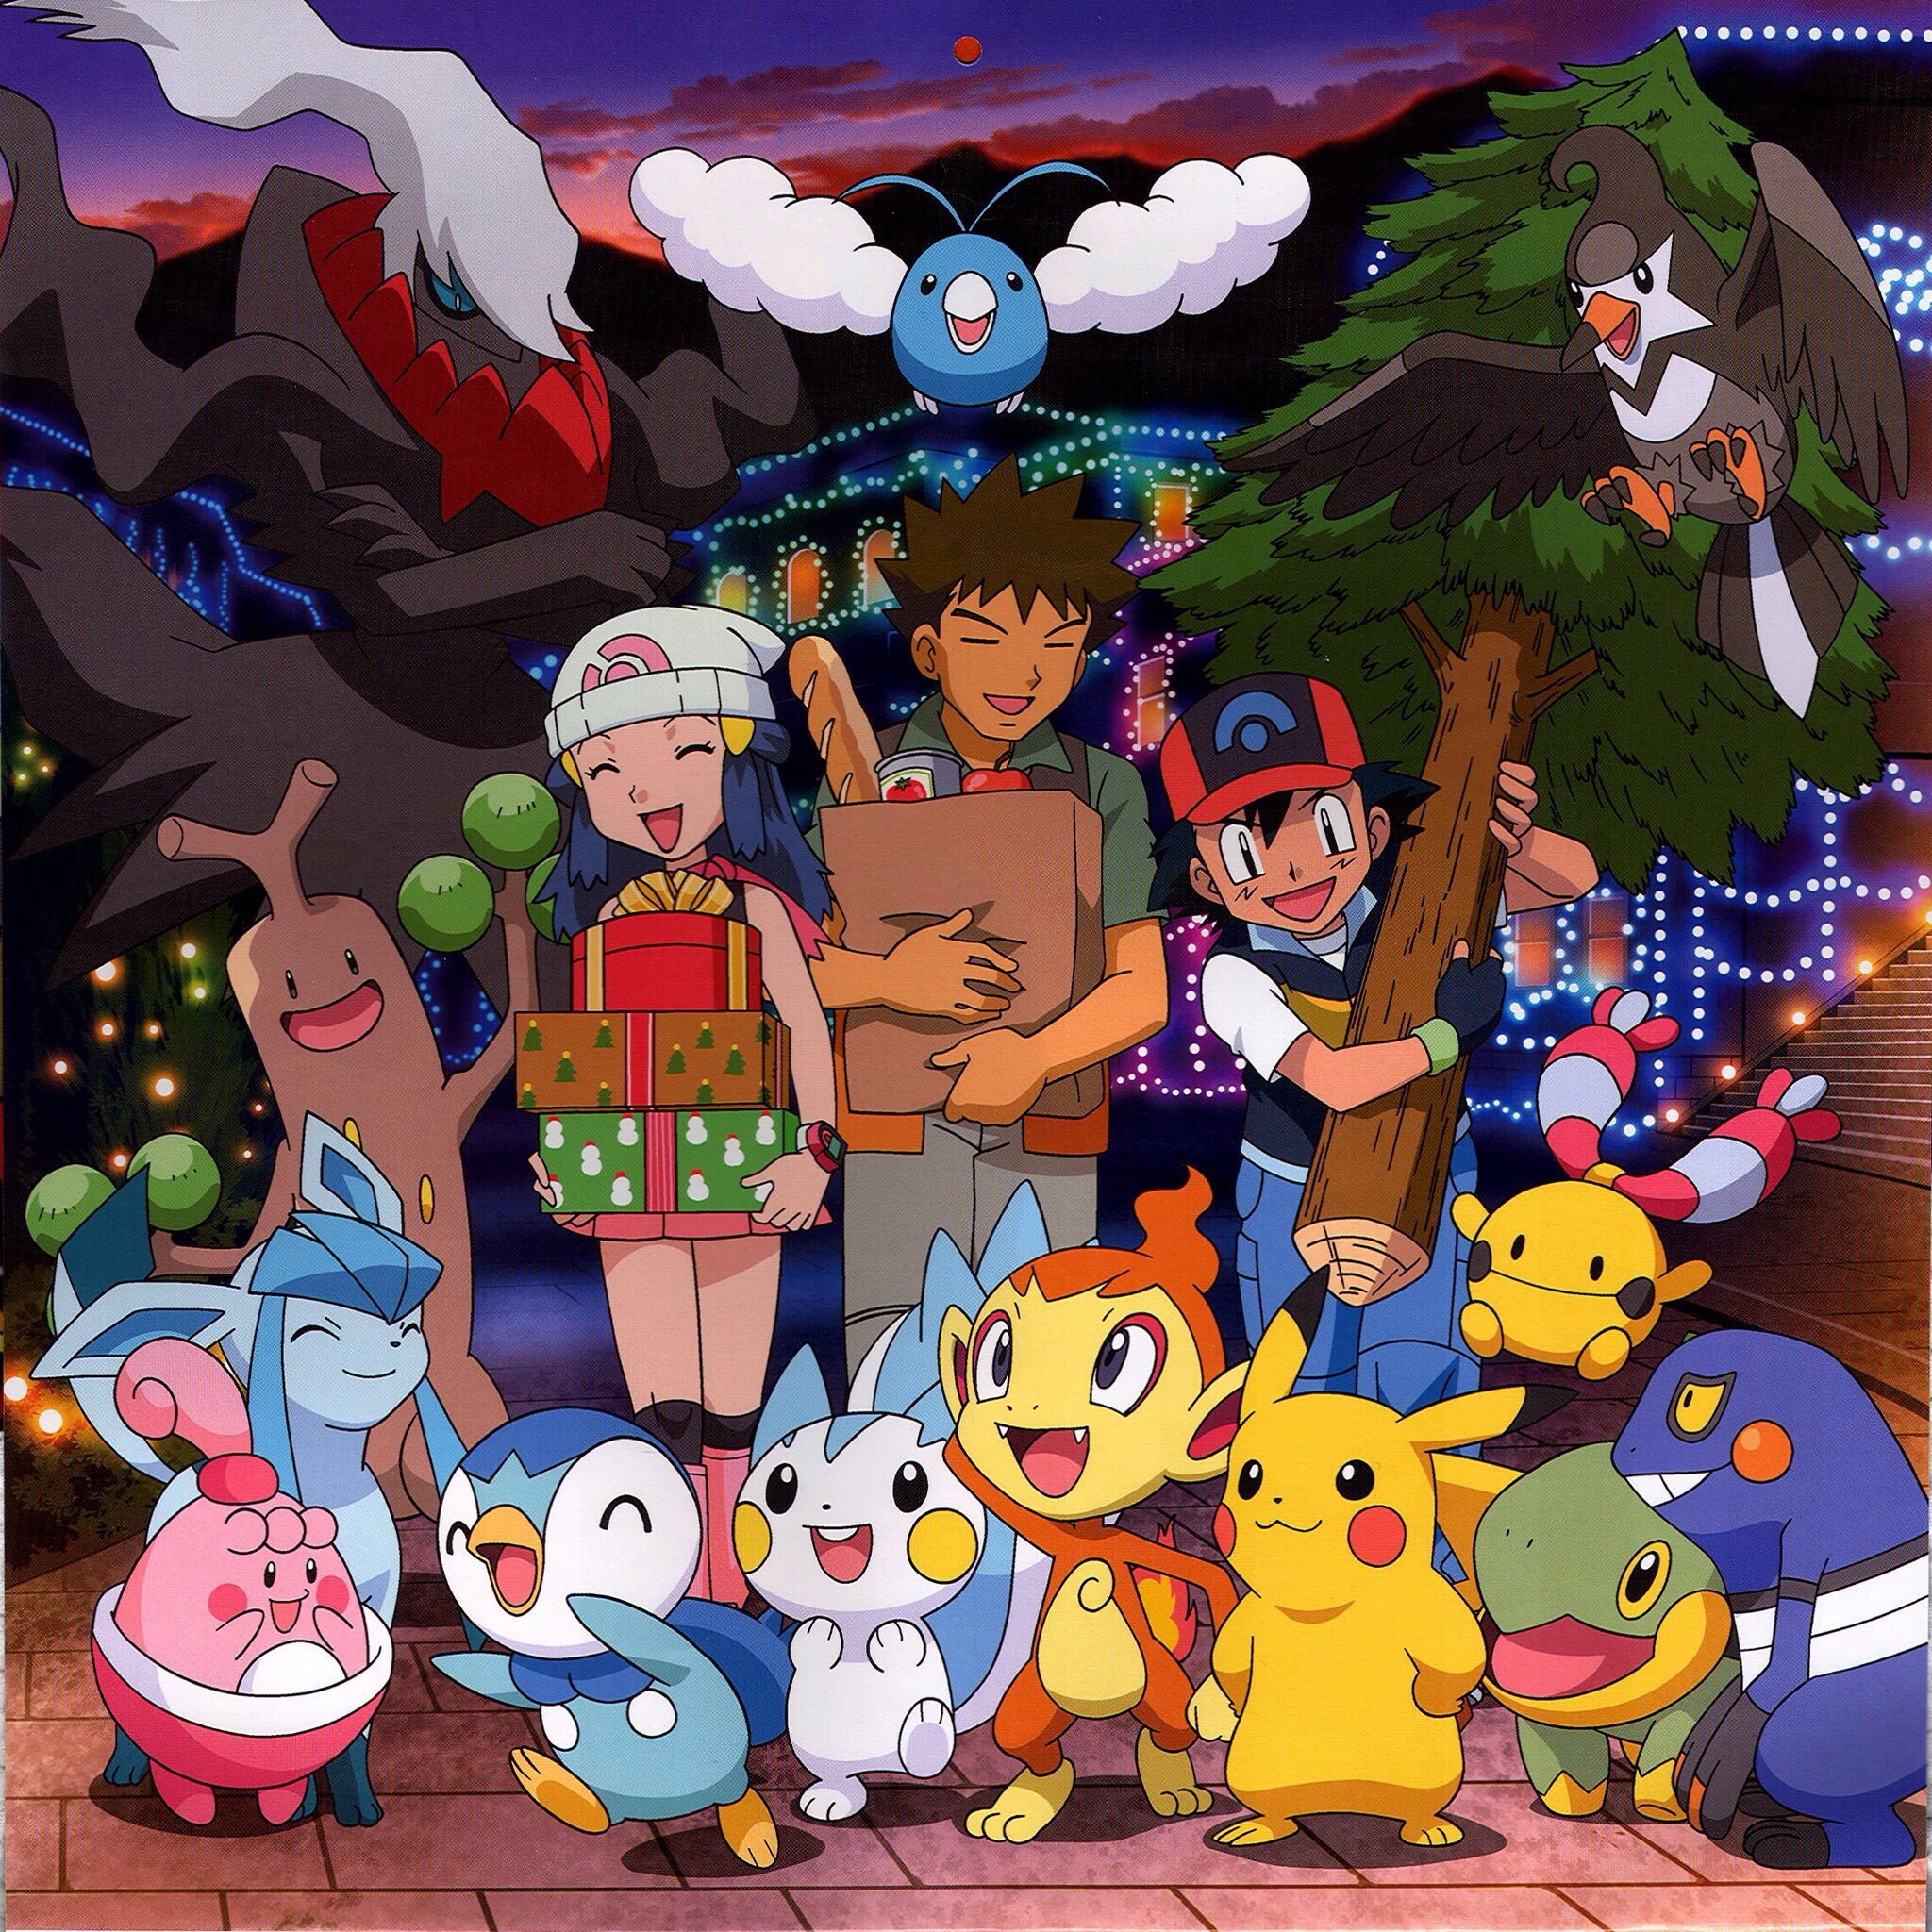 2048x2048 pokÃ©mon wallpaper probably containing animÃª called Ash, Pikachu, and the  rest of the gang